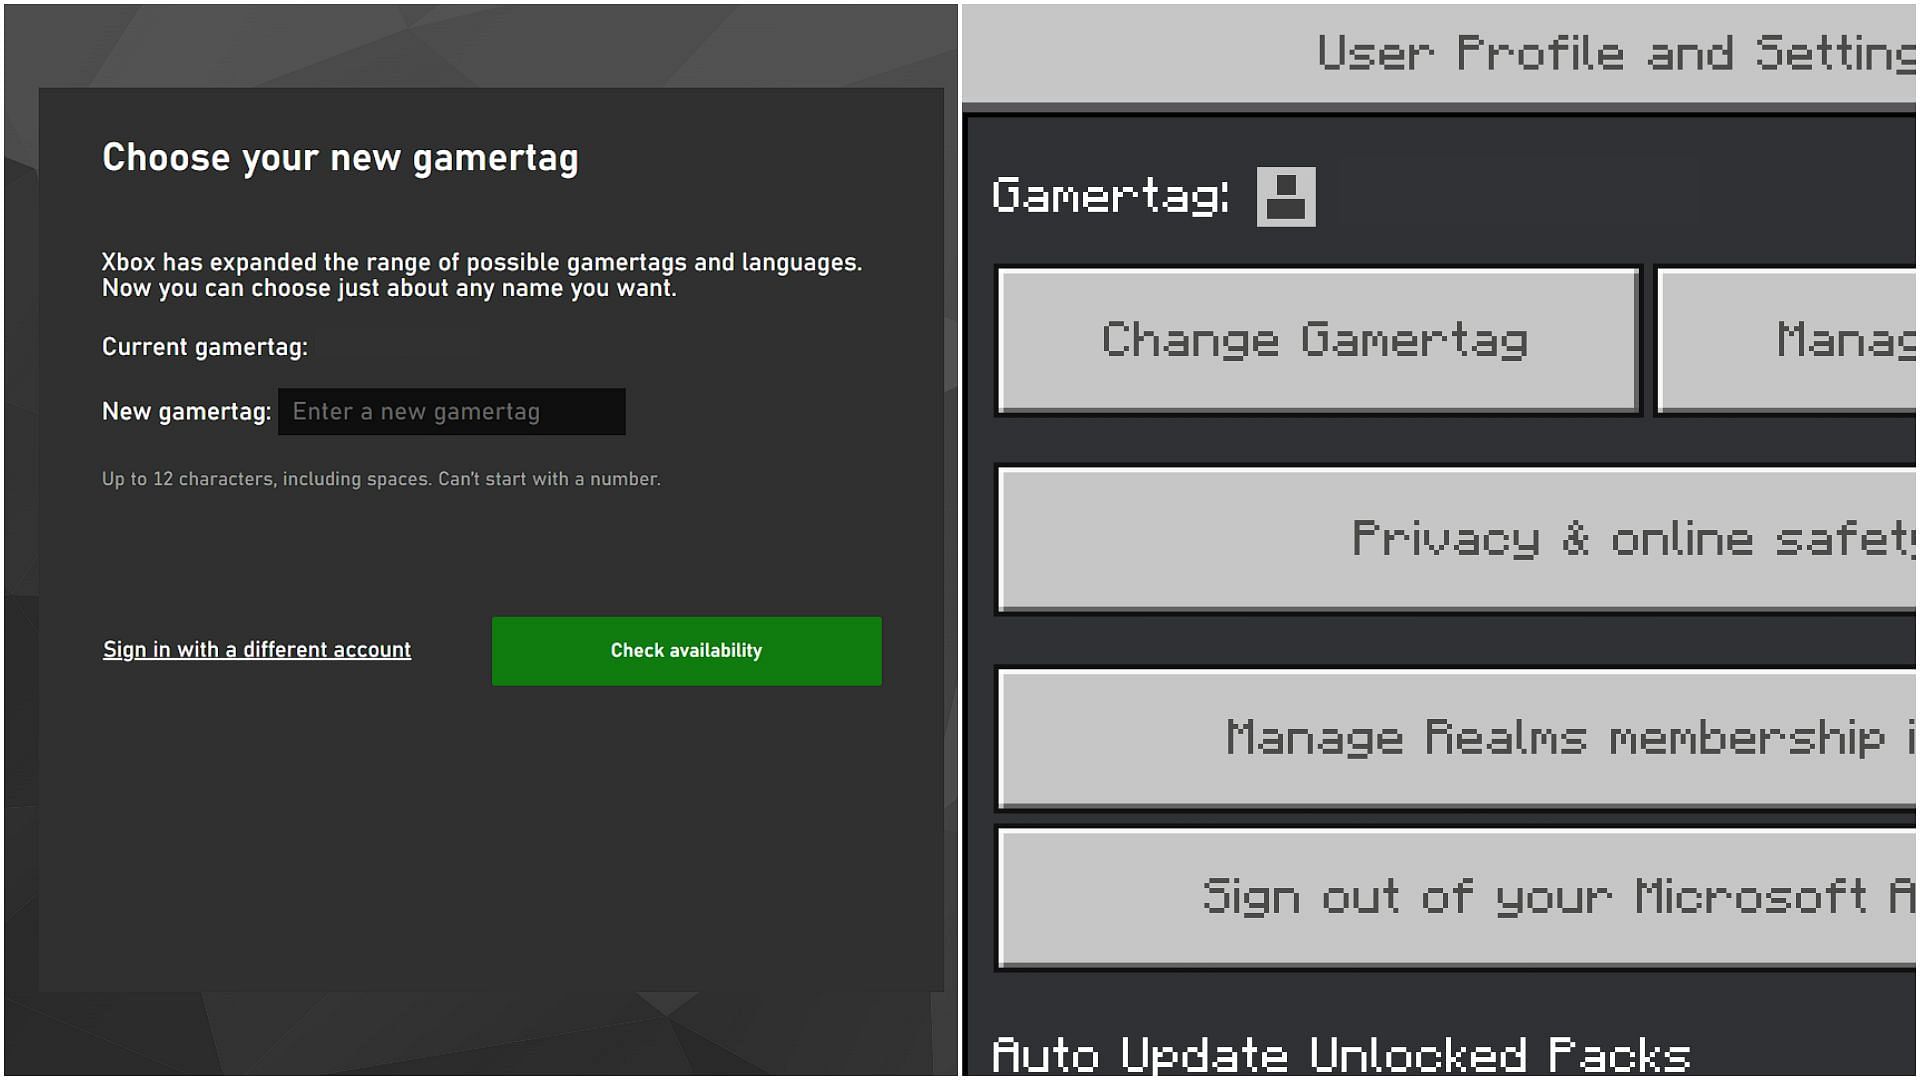 Can you help me understand this Gamertag Change process? The new